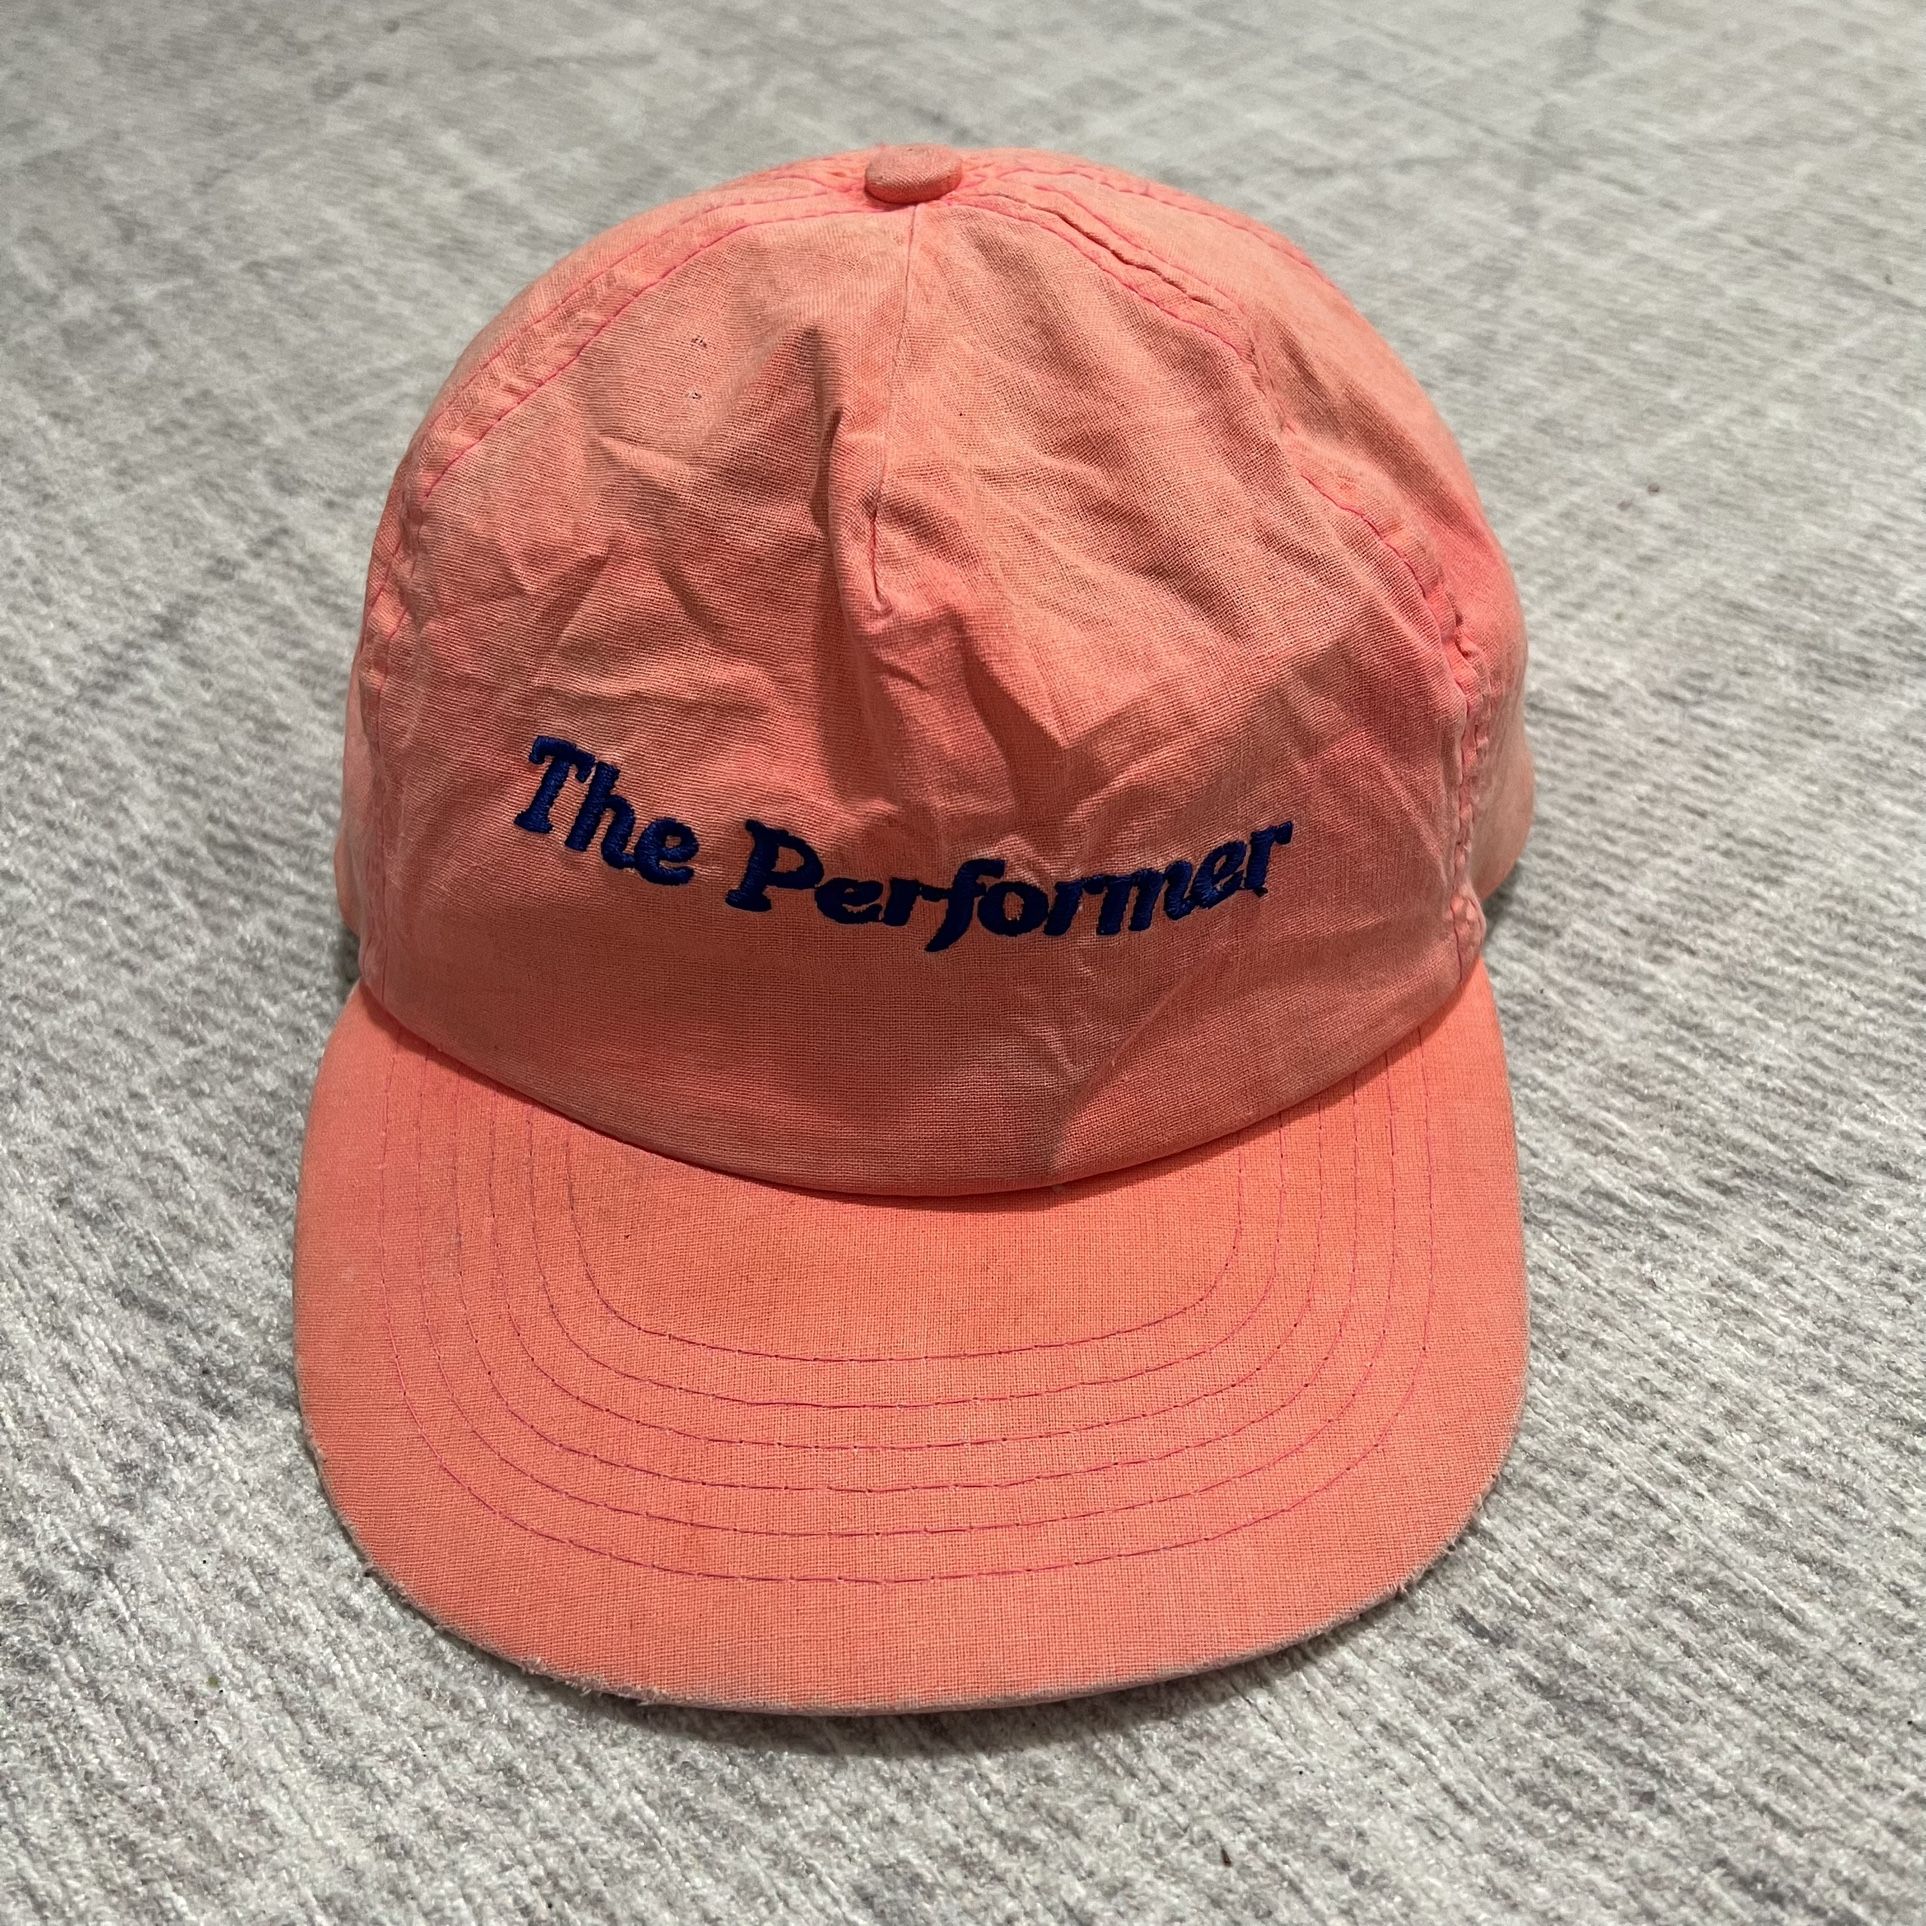 Vintage 1990s The Performer Men’s Outdoors Sports Neon Pink Snapback Hat